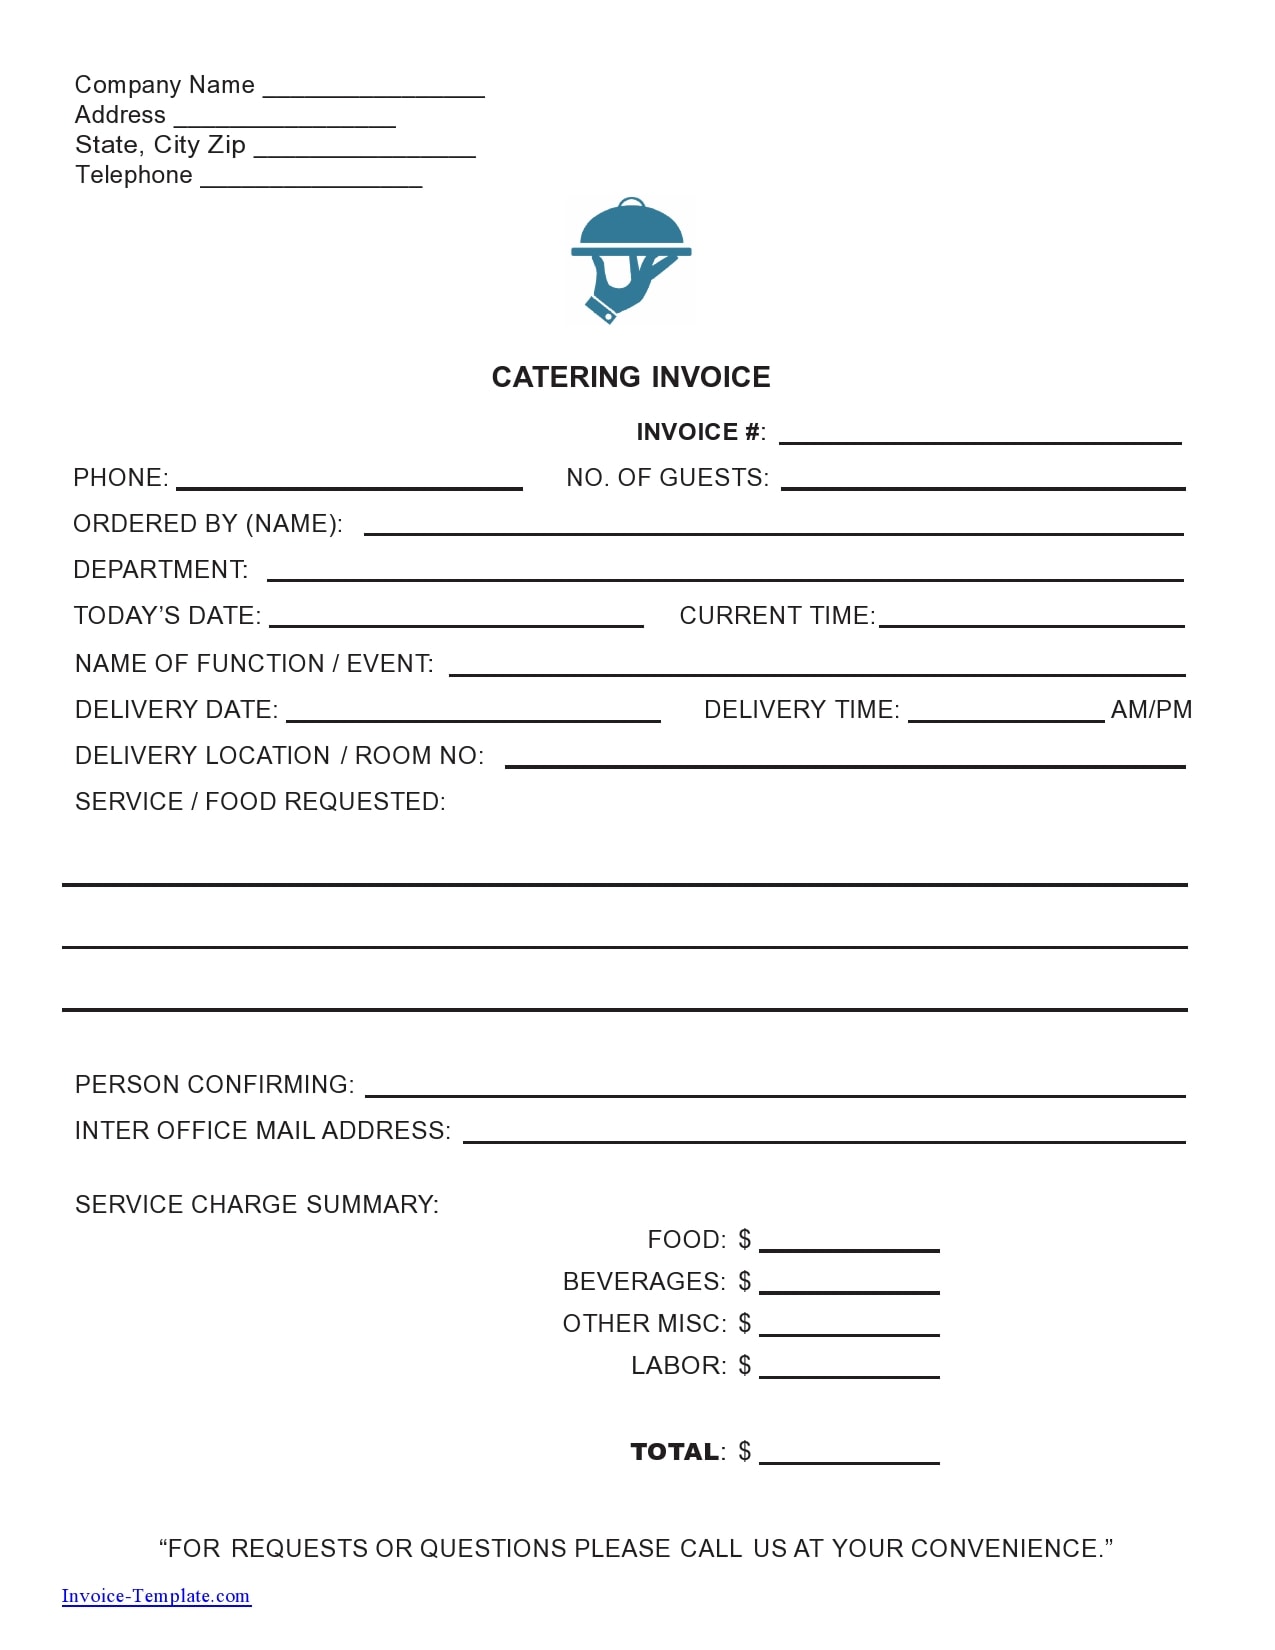 30 Free Catering Invoices Templates Samples